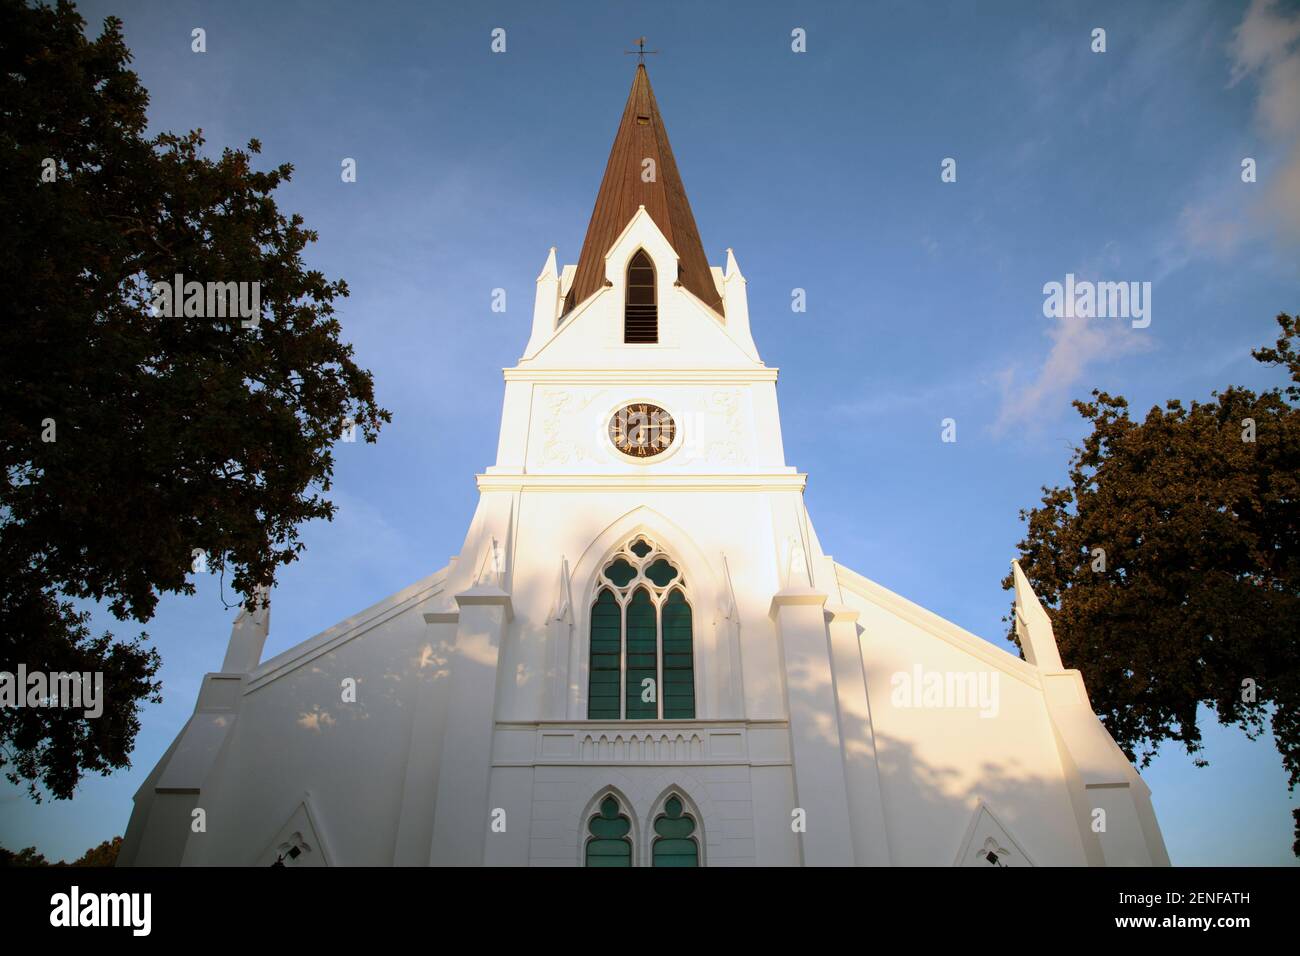 Dutch Reformed Church, South Africa Stock Photo